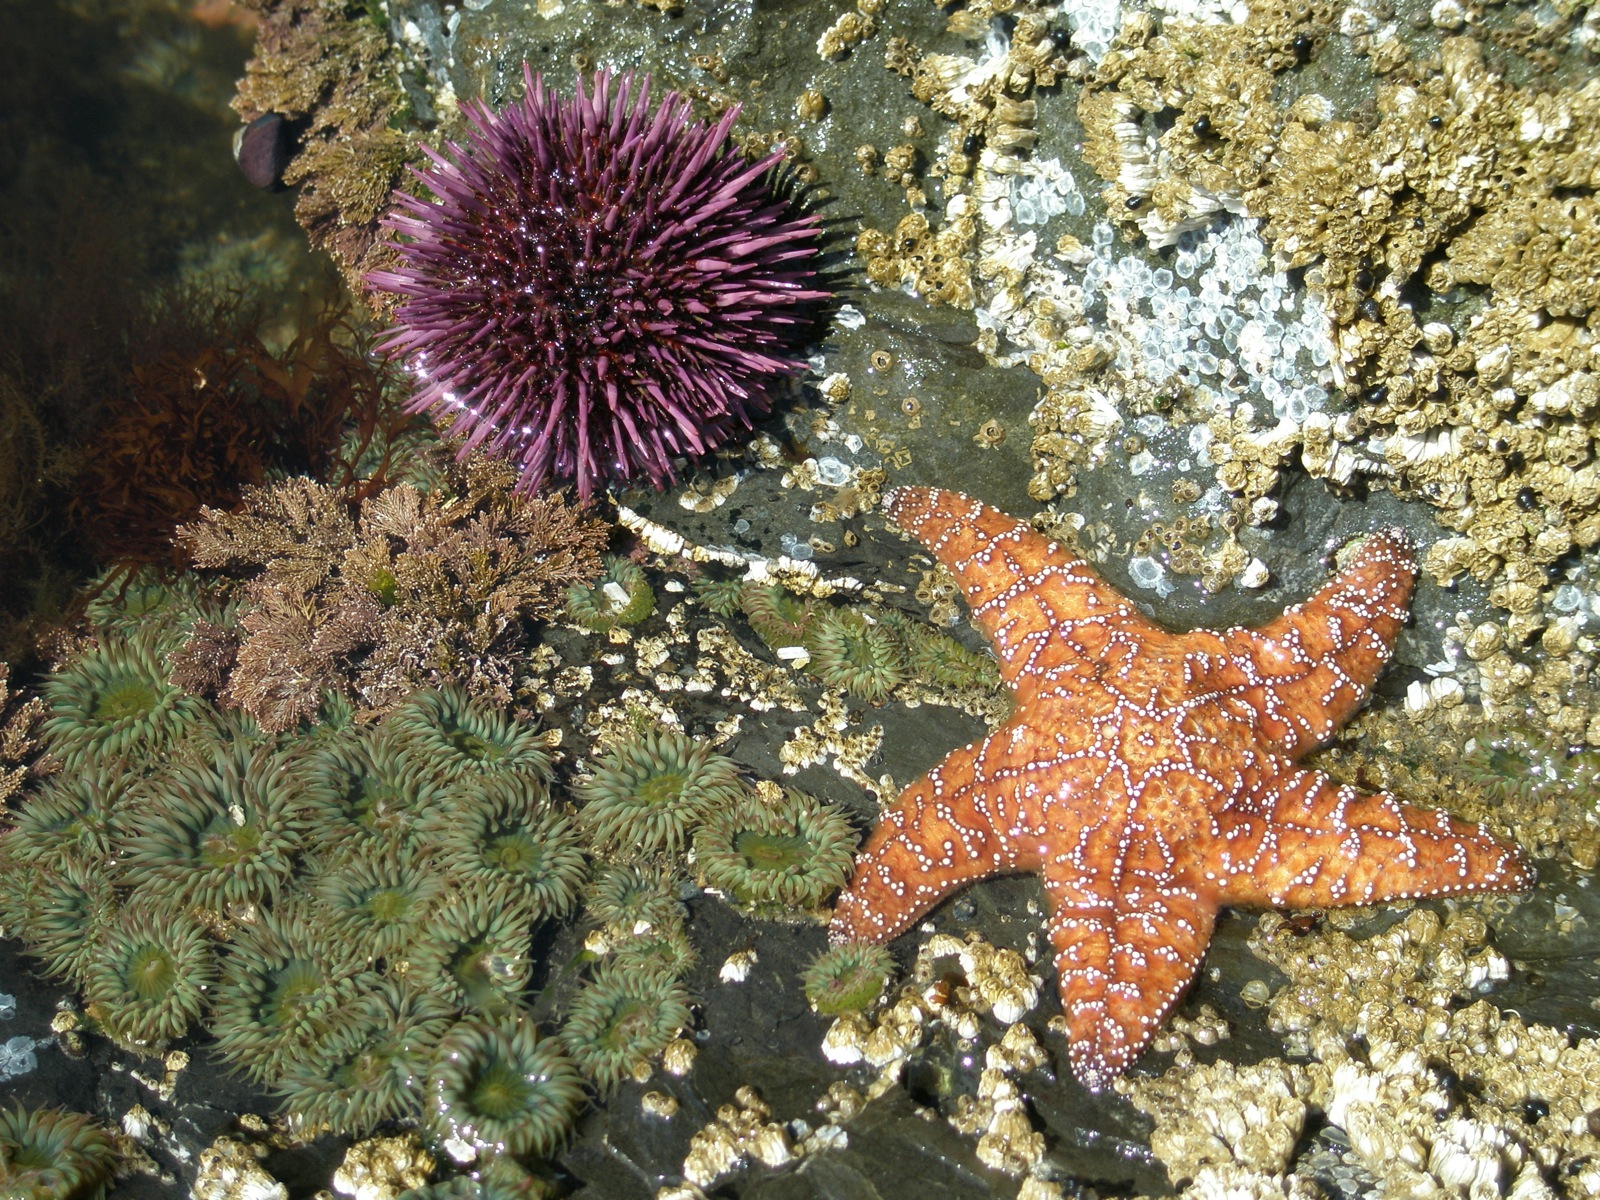 there is an orange starfish and an orange sea urchin on the seabed